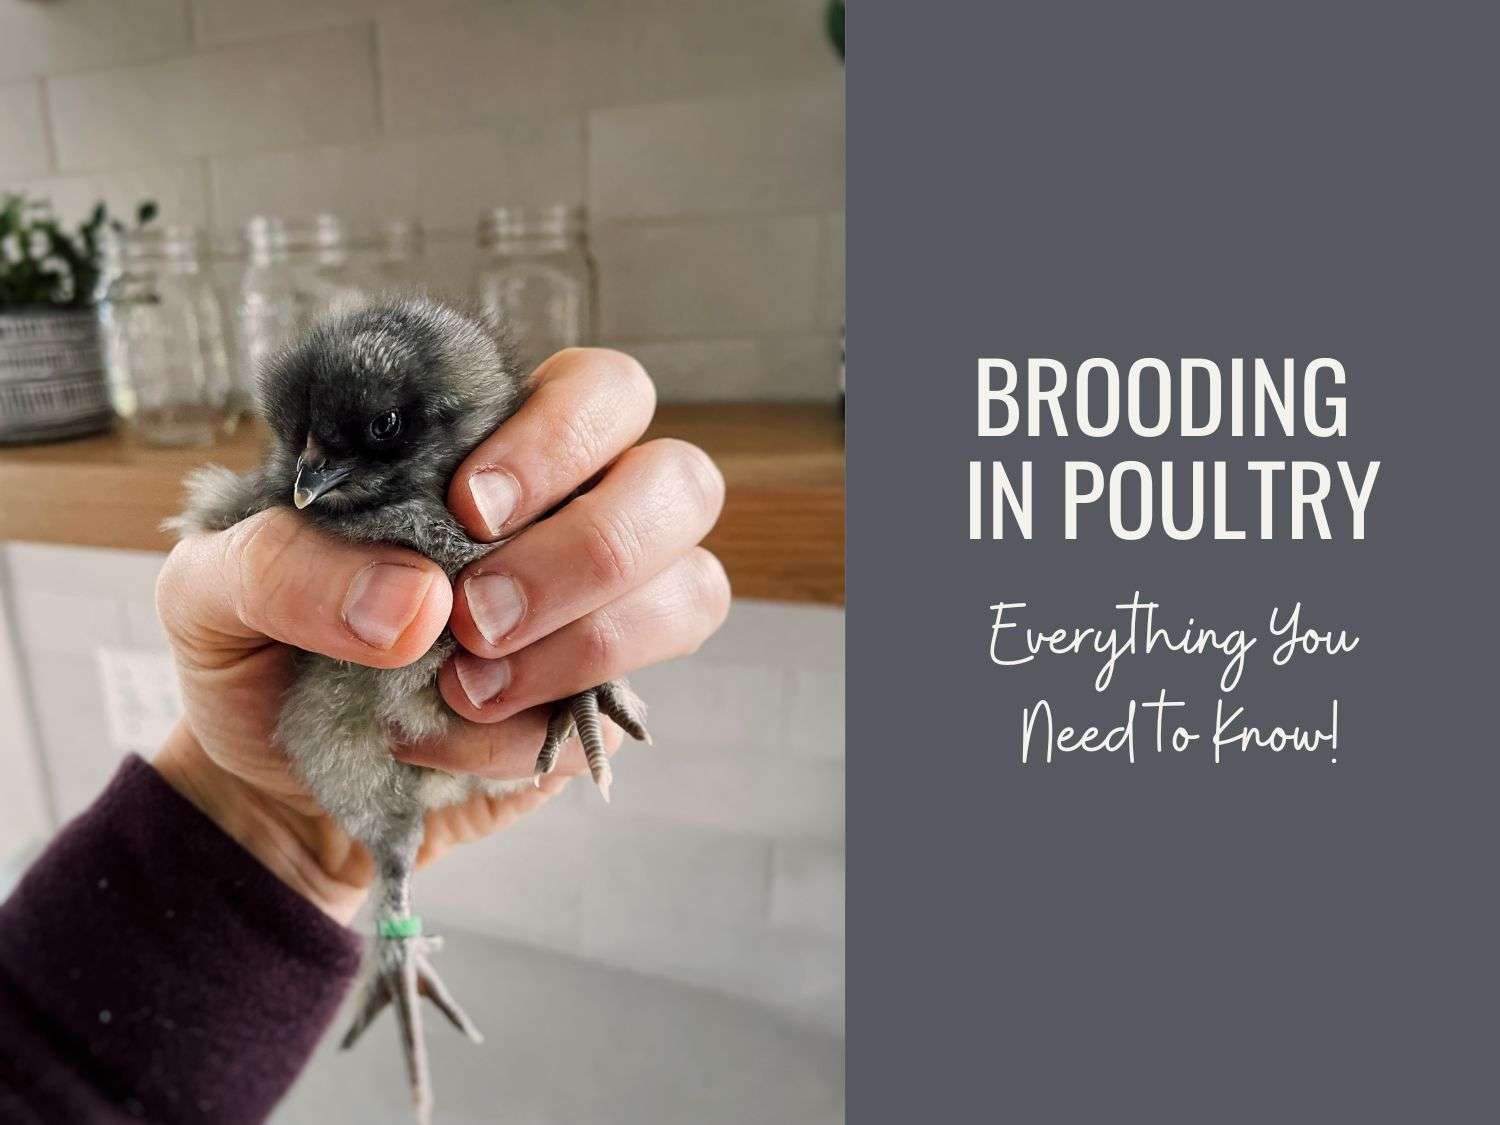 Brooding in poultry blog post promo photo